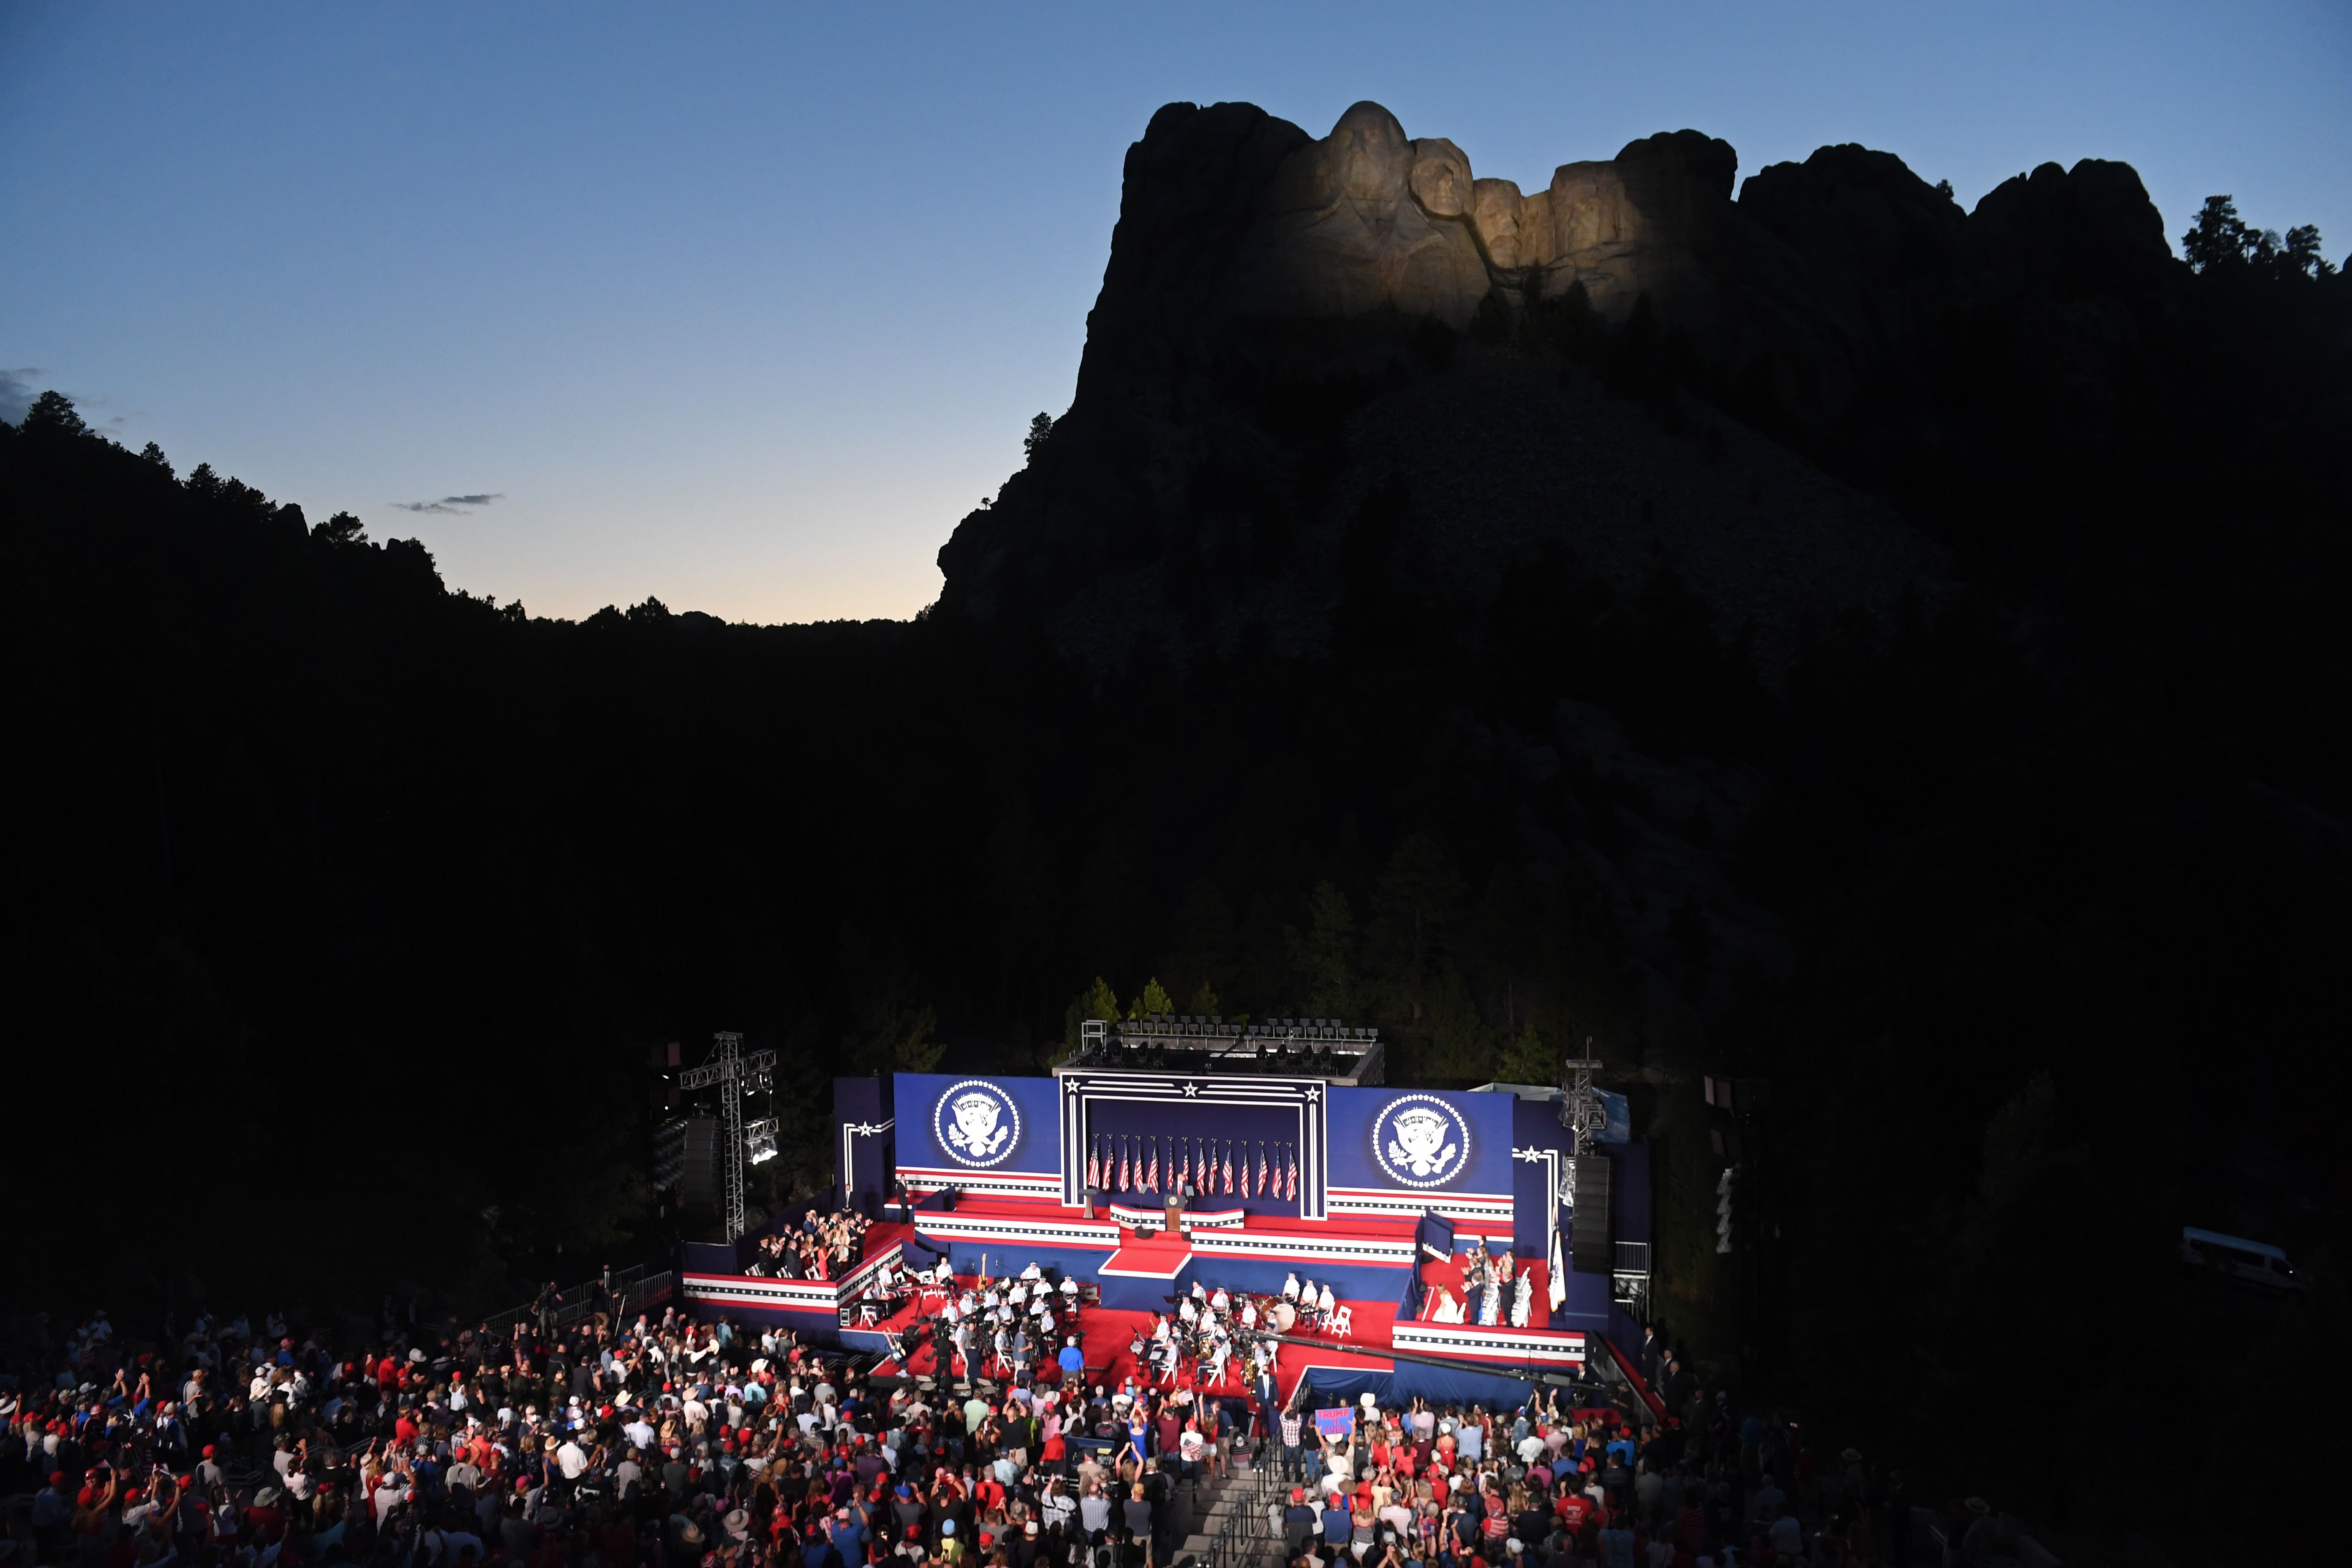 US President Donald Trump speaks during the Independence Day events at Mount Rushmore National Memorial in Keystone, South Dakota, July 3, 2020. (Photo by SAUL LOEB / AFP) (Photo by SAUL LOEB/AFP via Getty Images)